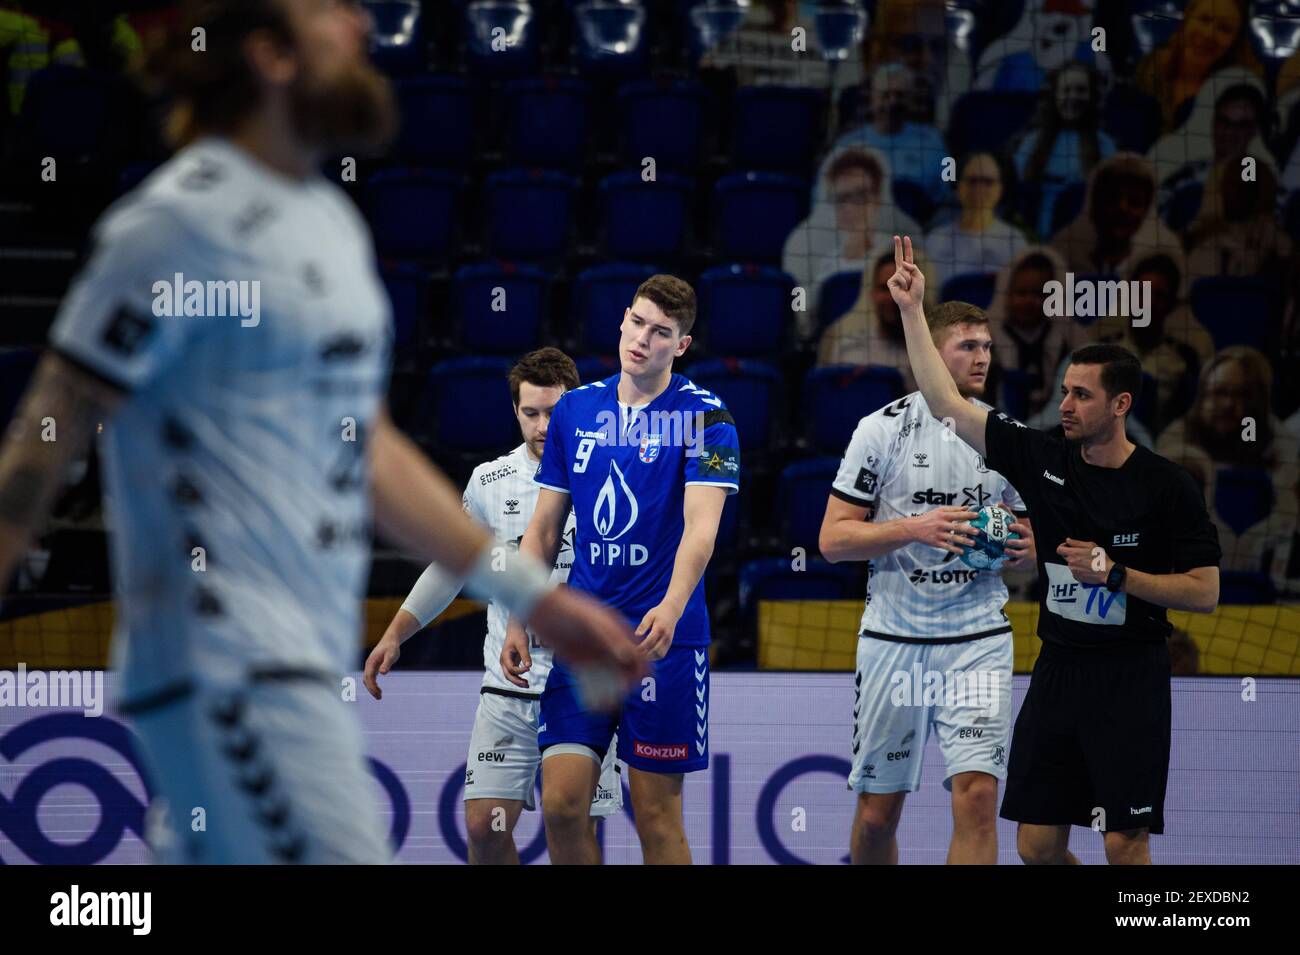 Kiel, Germany. 04th Mar, 2021. Handball: Champions League, THW Kiel - RK  Zagreb, Group Stage, Group B, Matchday 14. Zagreb's Luka Lovre Klarica (M)  is given a 2-minute penalty for a foul.